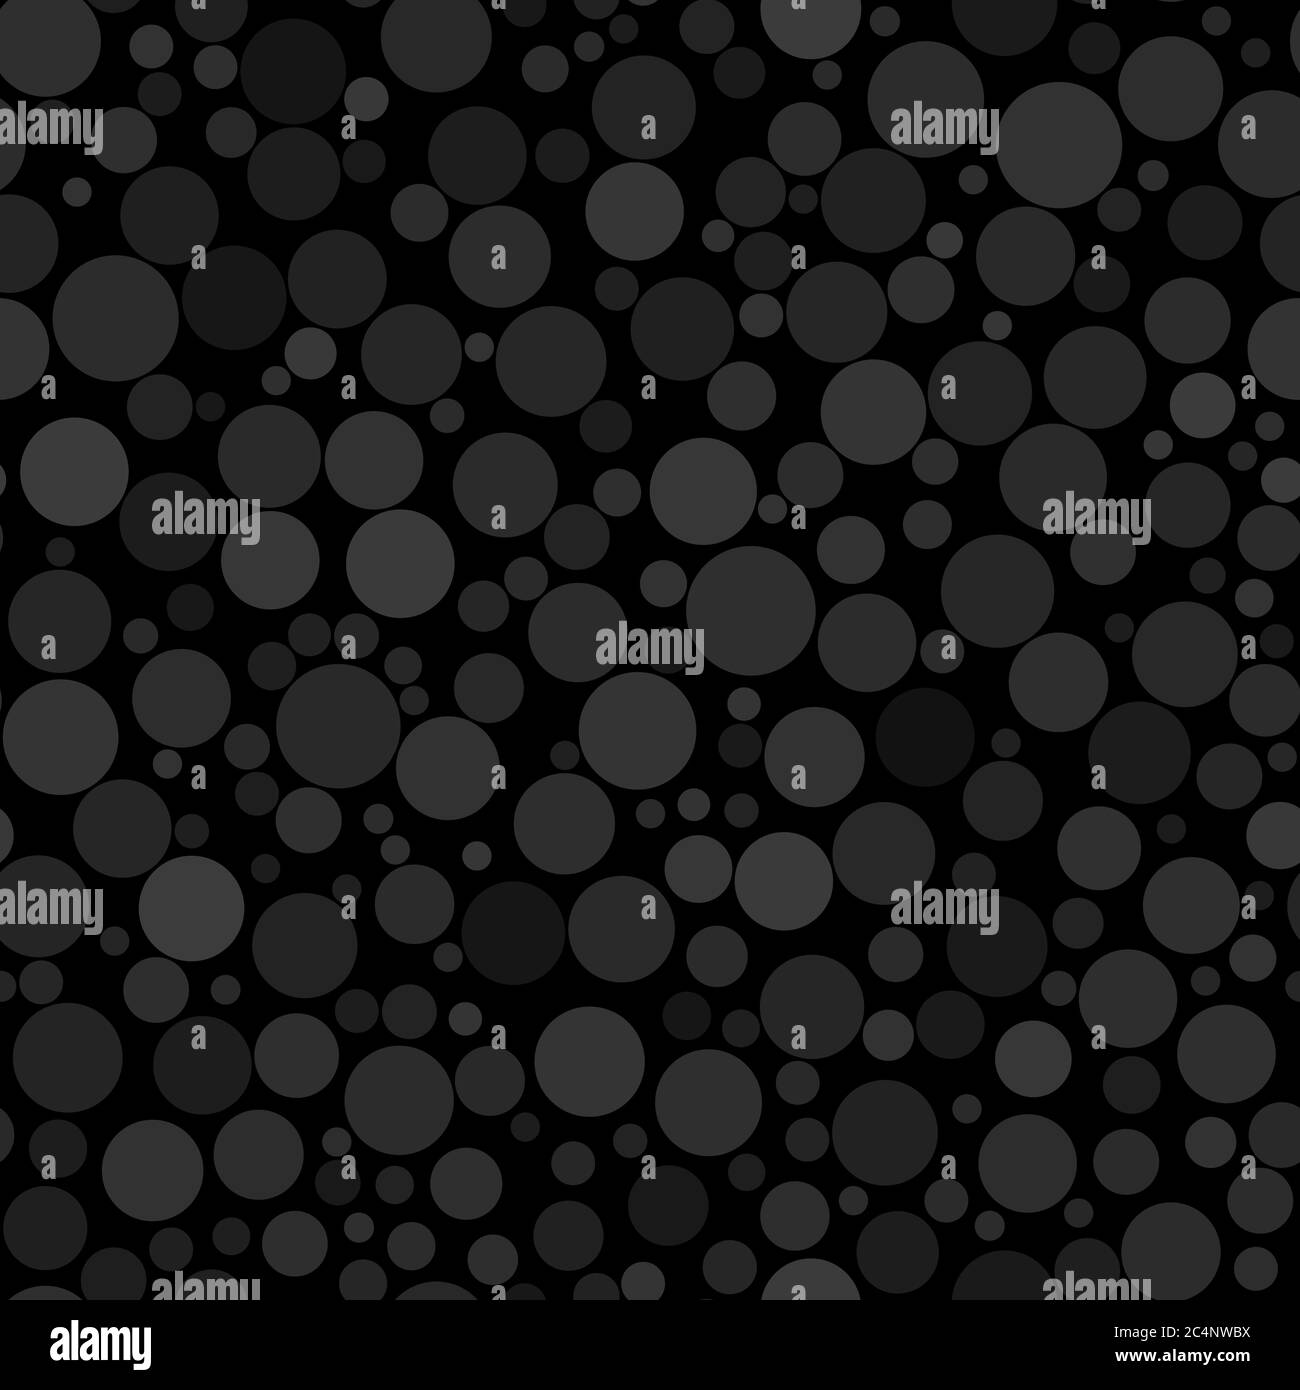 Abstract seamless pattern of circles of different sizes in black and gray colors Stock Vector